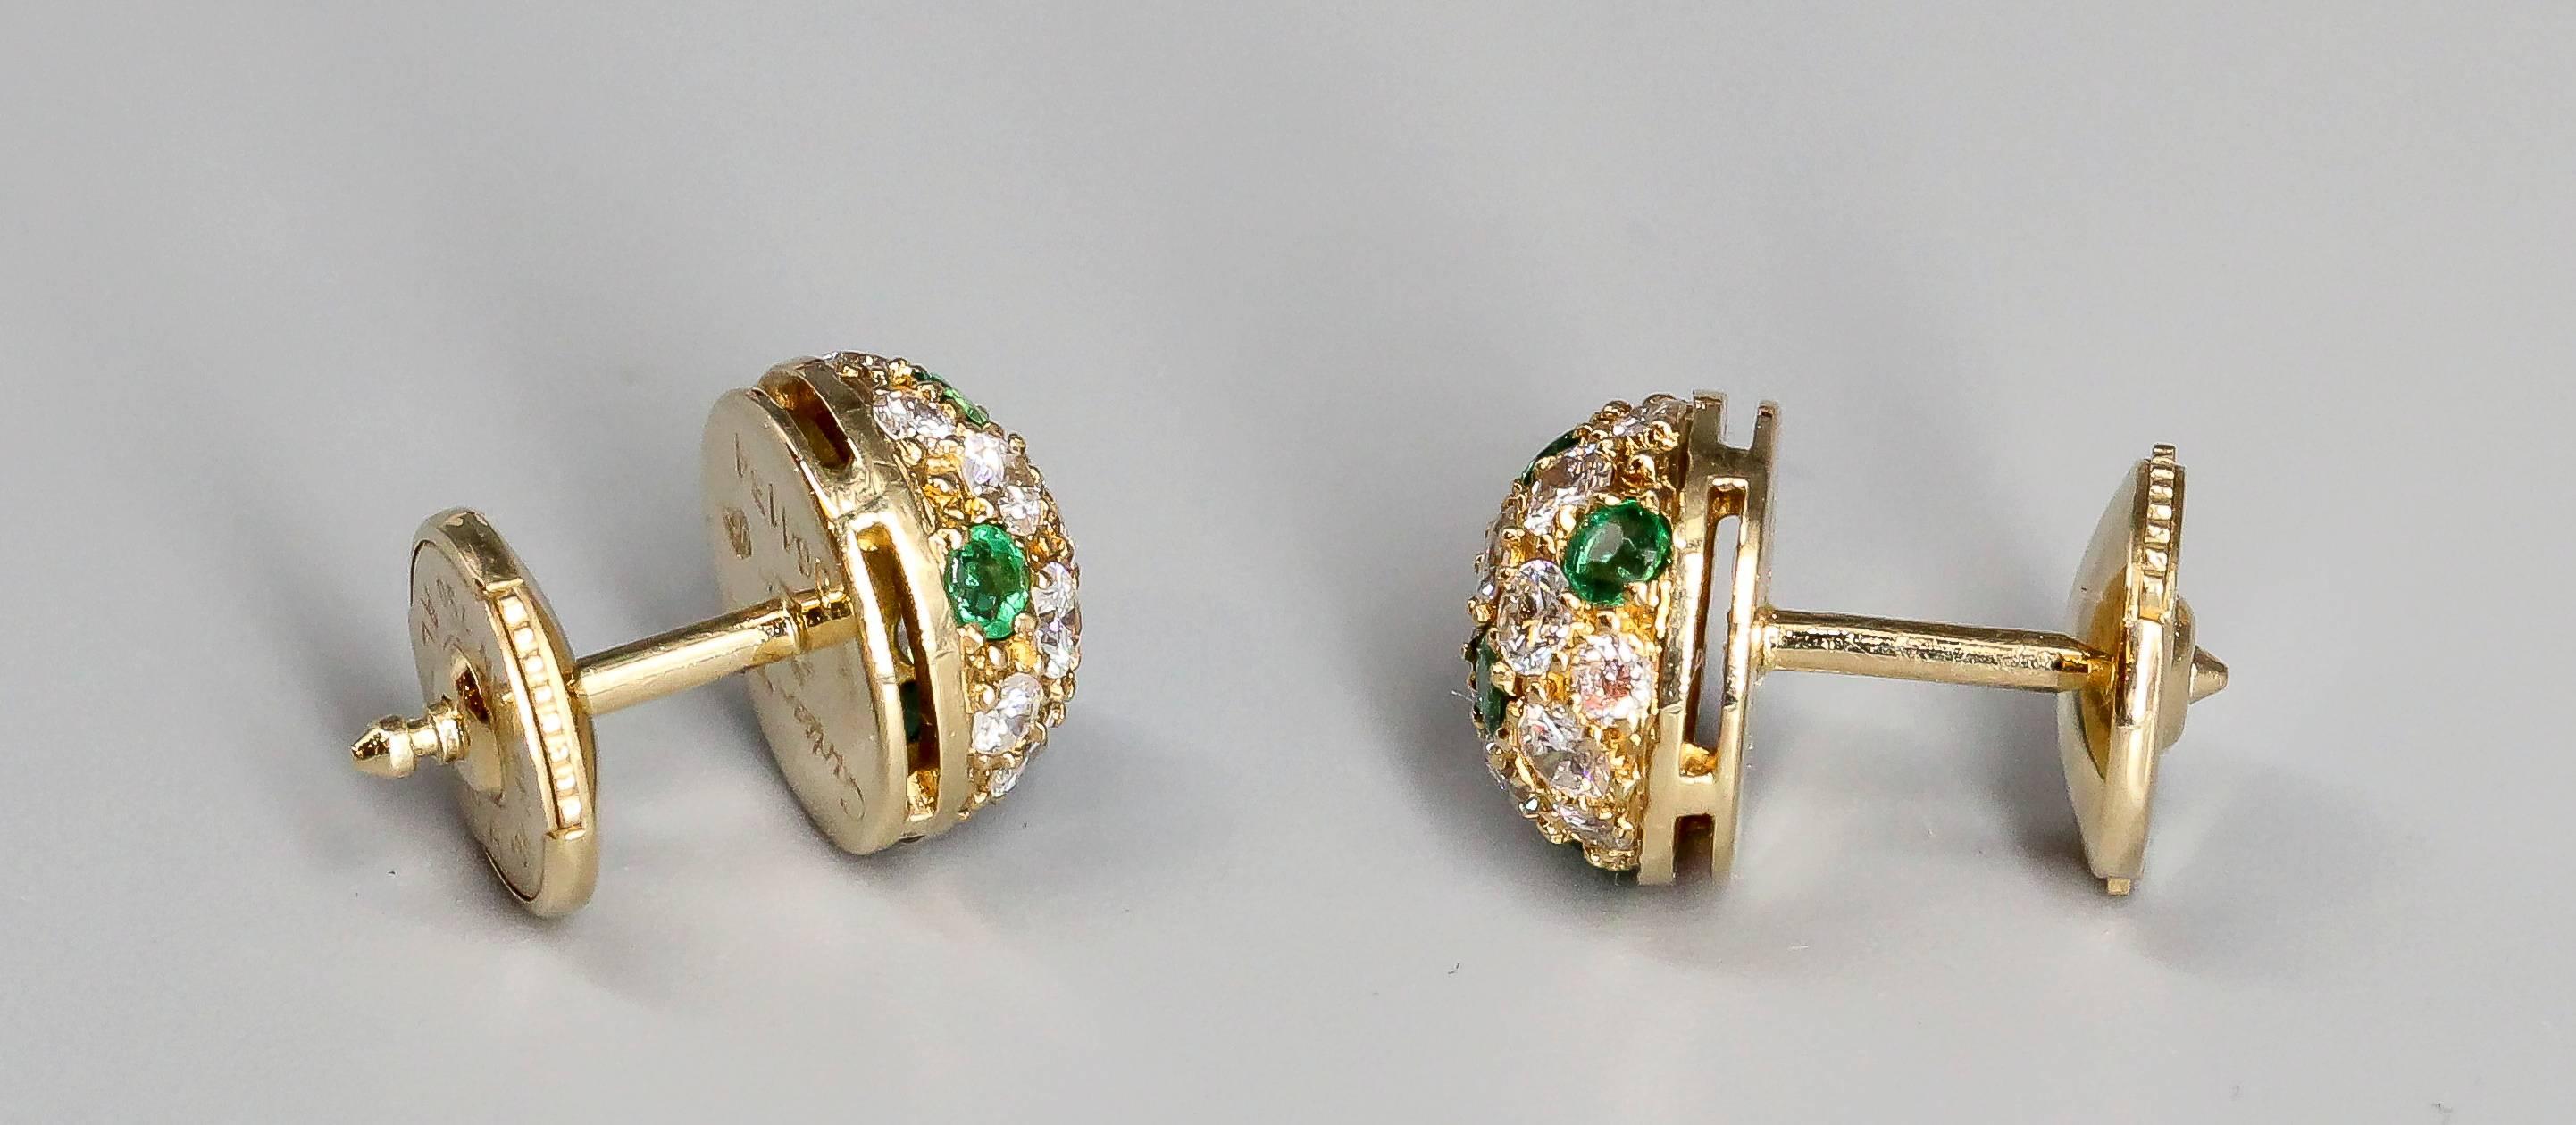 Chic emerald, diamond and 18K yellow gold earrings by Cartier. They feature deep green emeralds, along with high grade round brilliant cut diamonds, over an 18K yellow gold setting. Beautifully made and highly versatile.

Hallmarks: Cartier, 750,